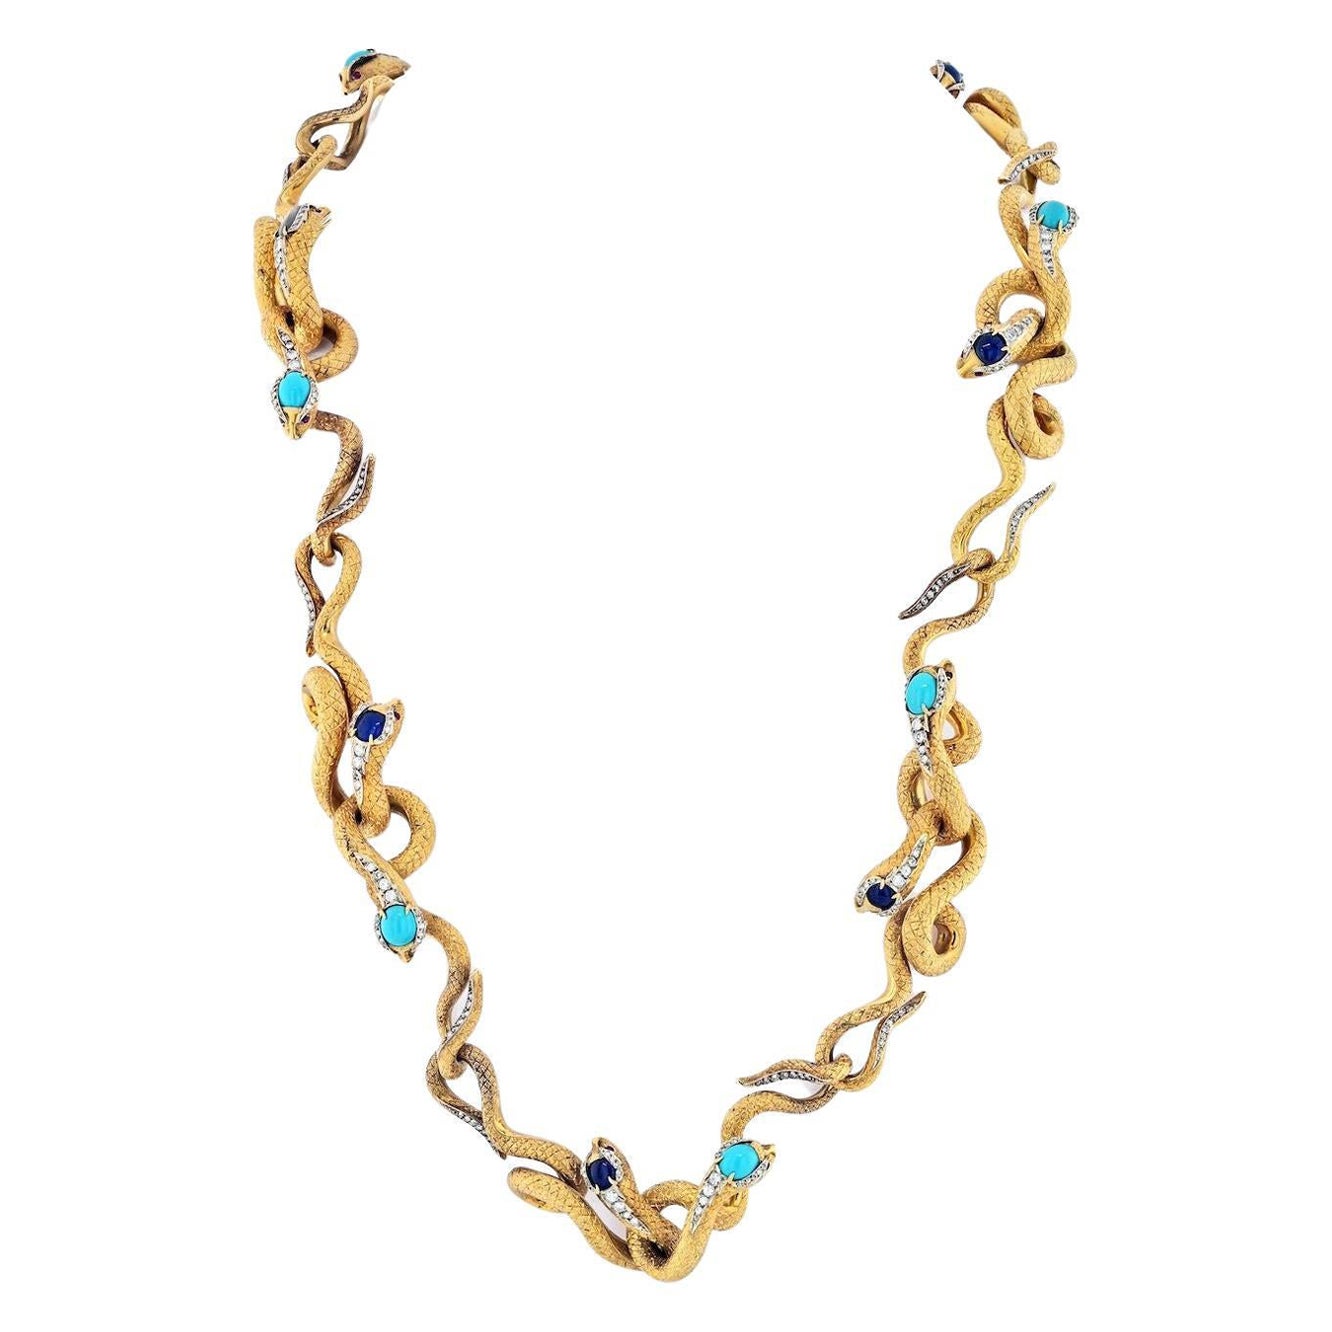 18K Yellow Gold Articulated Snakes with Turquoise, Lapis and Diamond Necklace